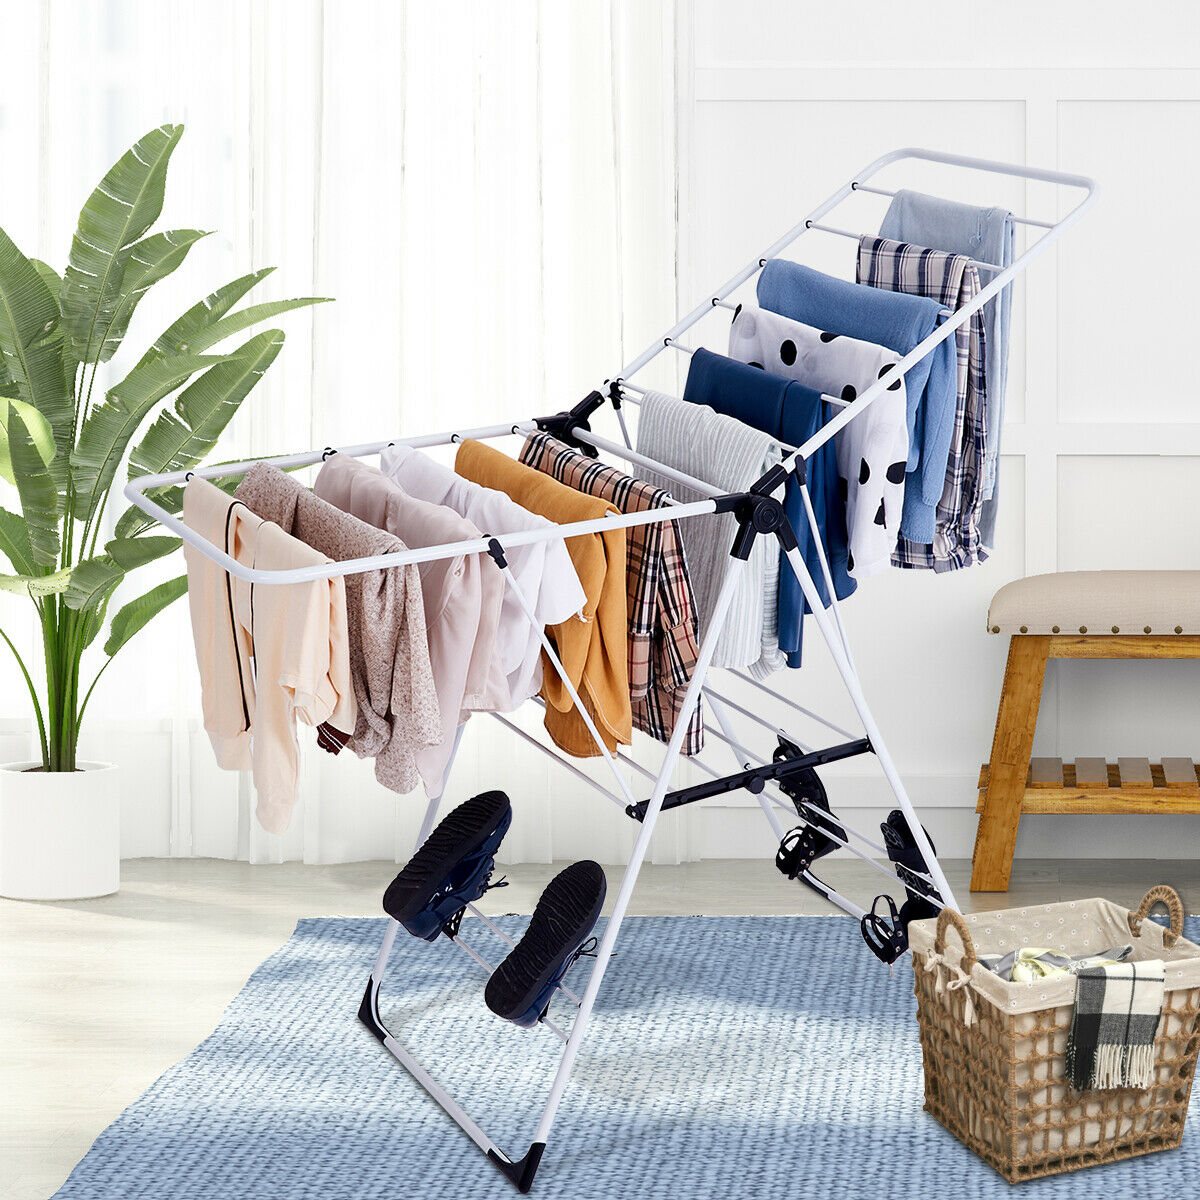 Costway Laundry Clothes Storage Drying Rack Portable Folding Dryer Hanger Heavy Duty - image 3 of 10